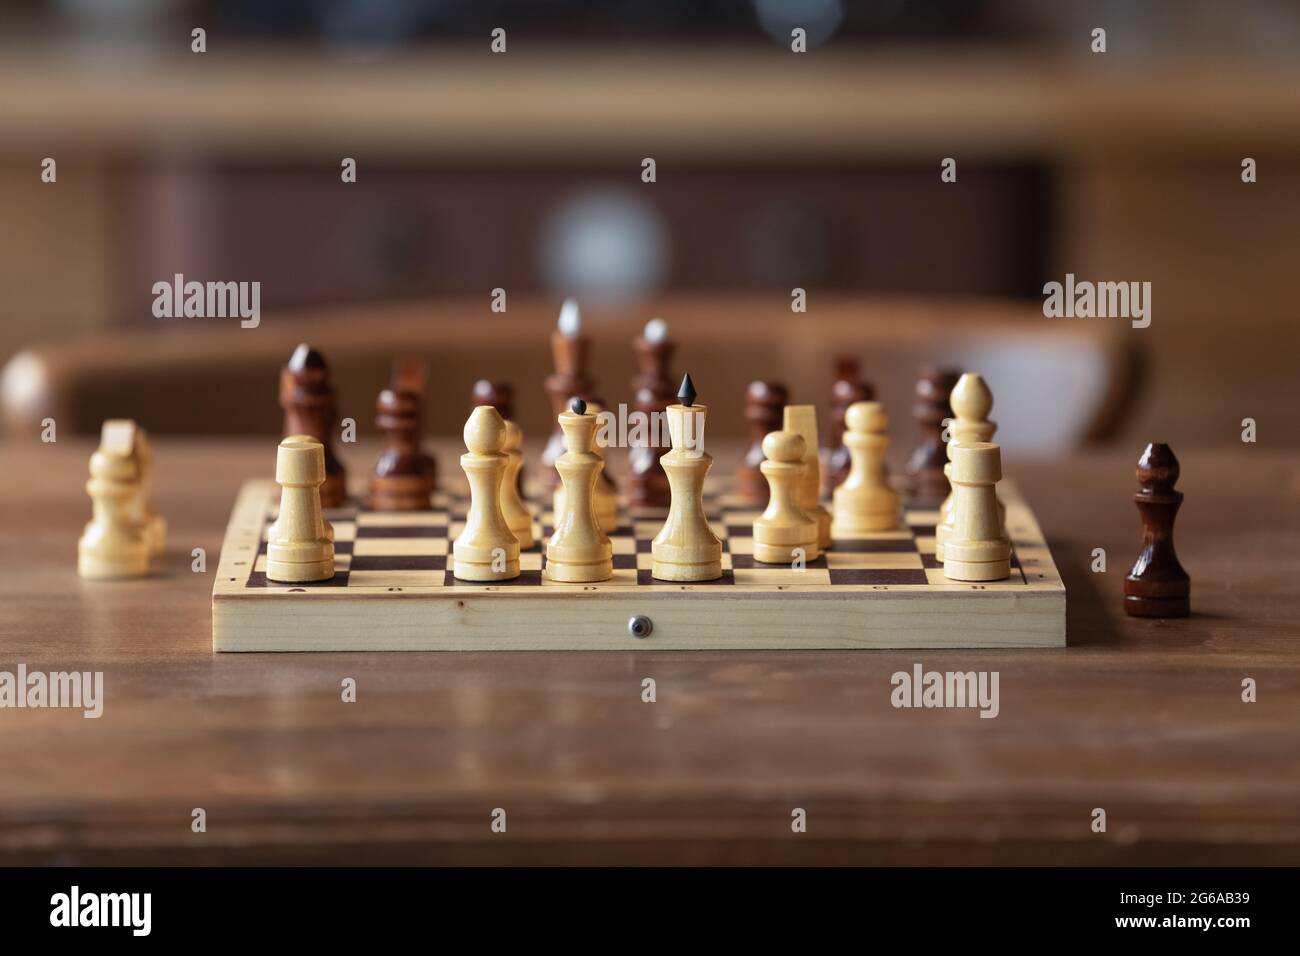 Chessboard on table in game process. Board with chess pieces Stock Photo